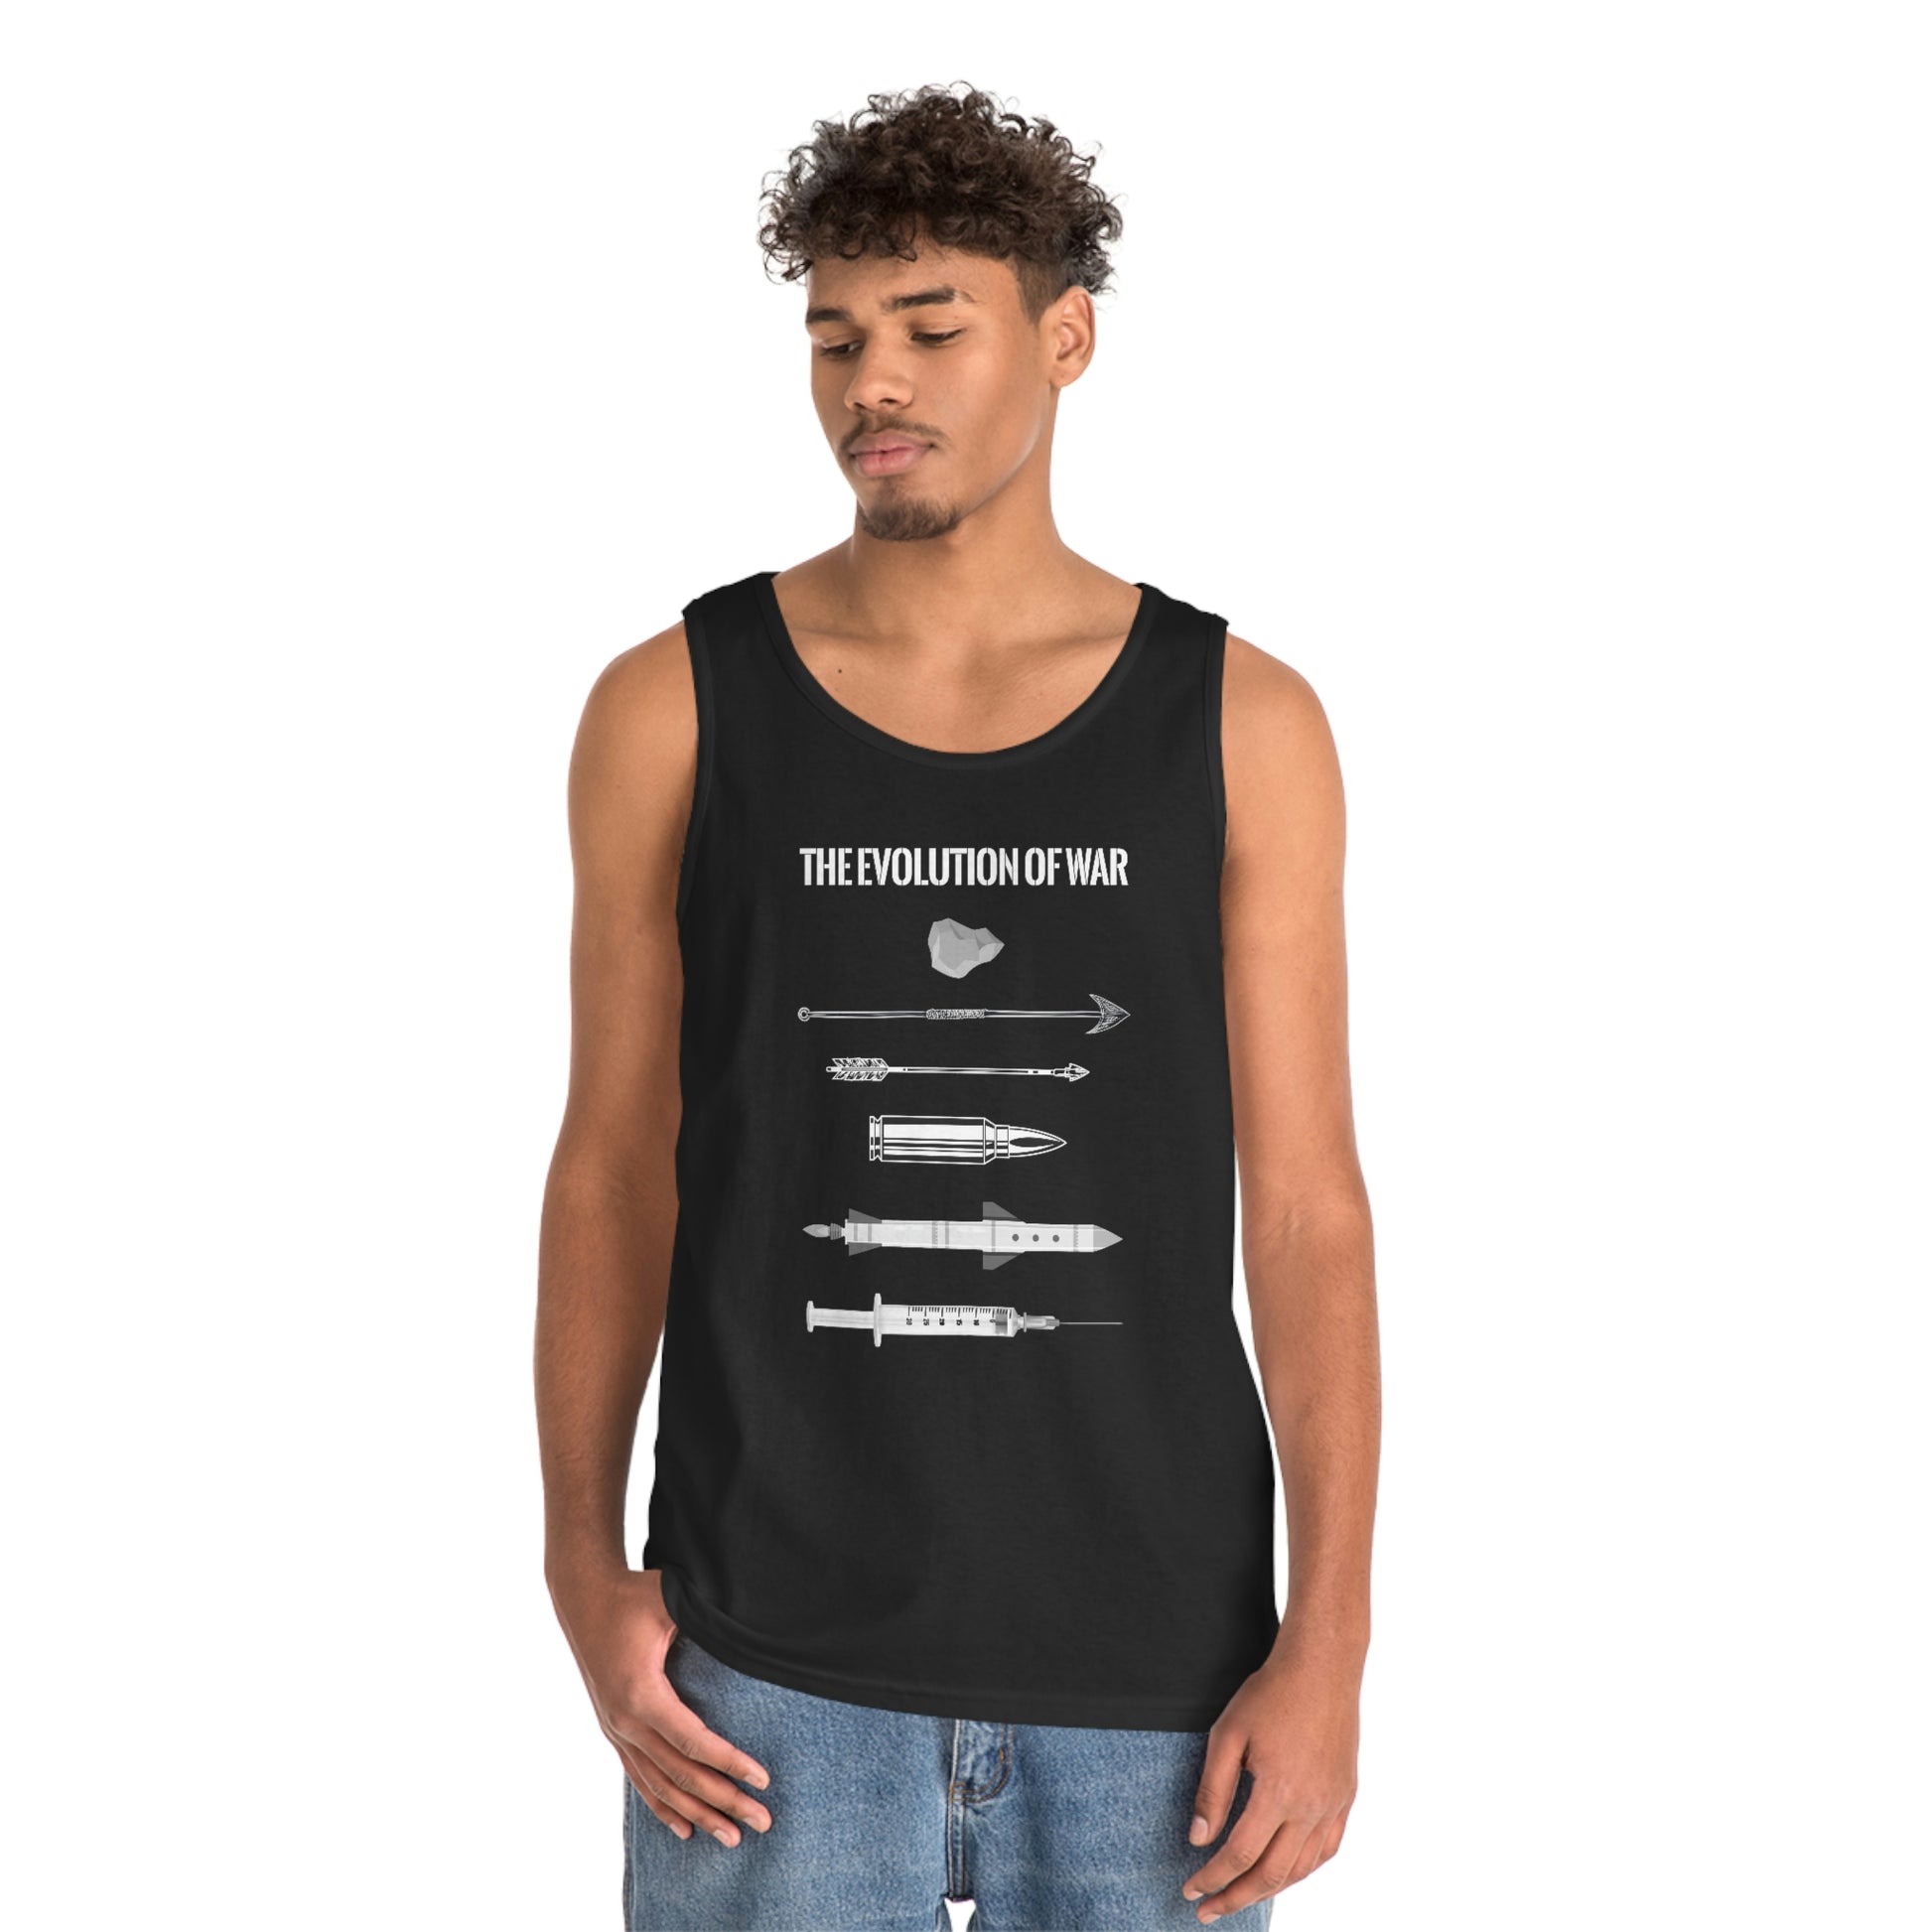 The Evolution of War | Men's Heavy Cotton Tank Top - Rise of The New Media